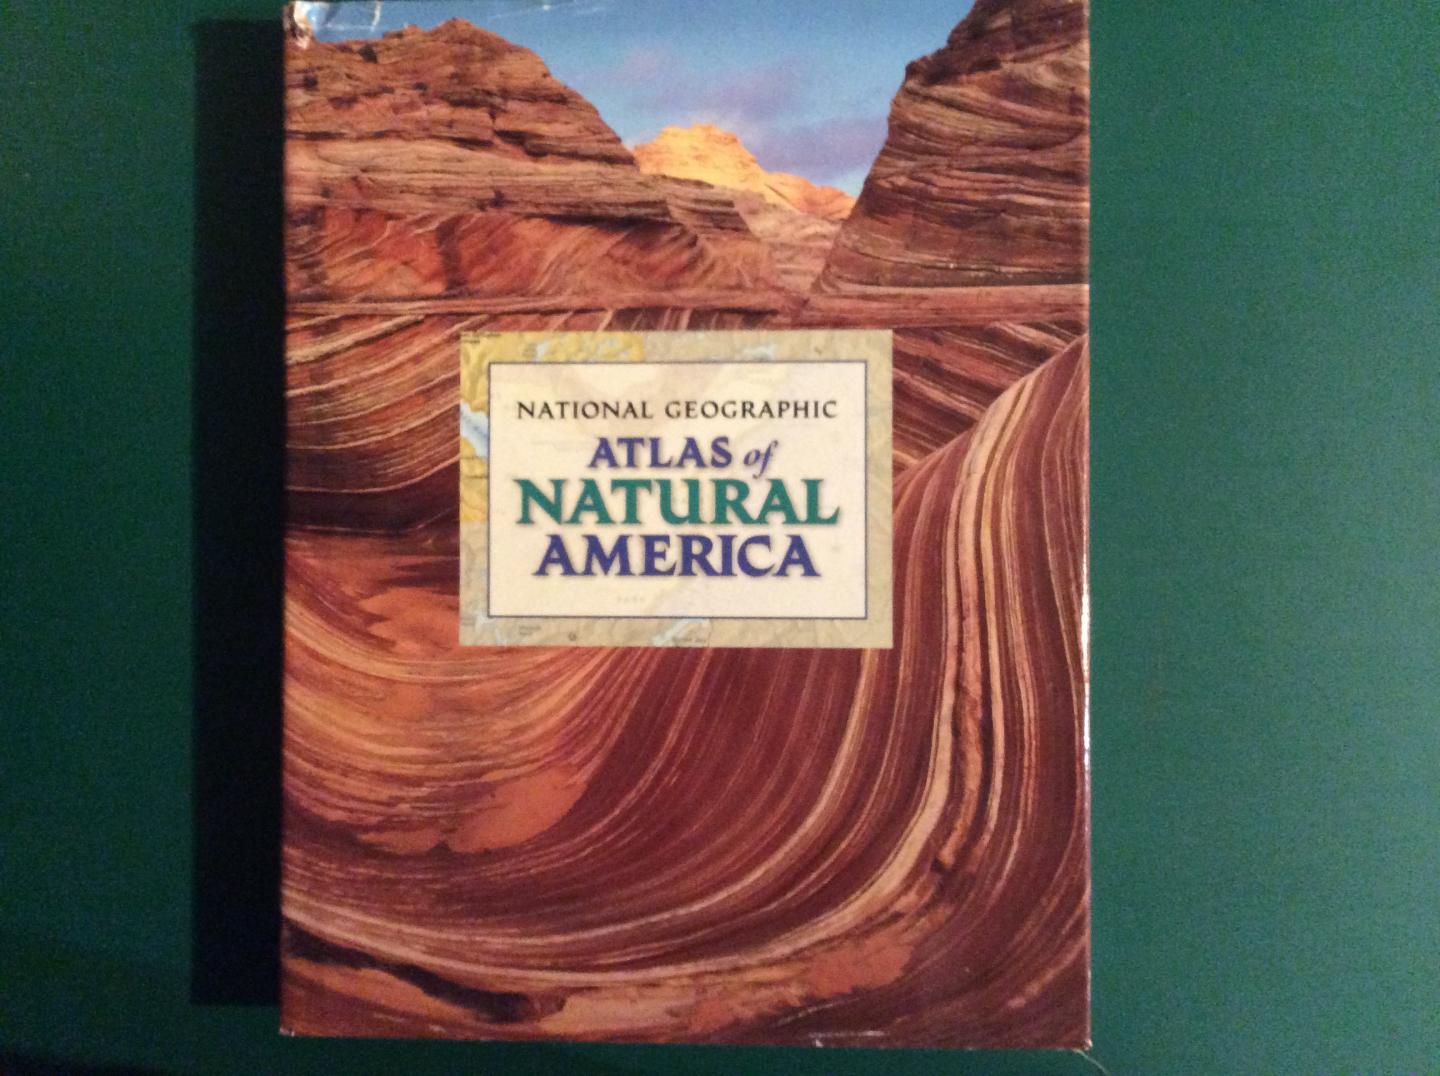  - National Geographic Atlas of Natural America